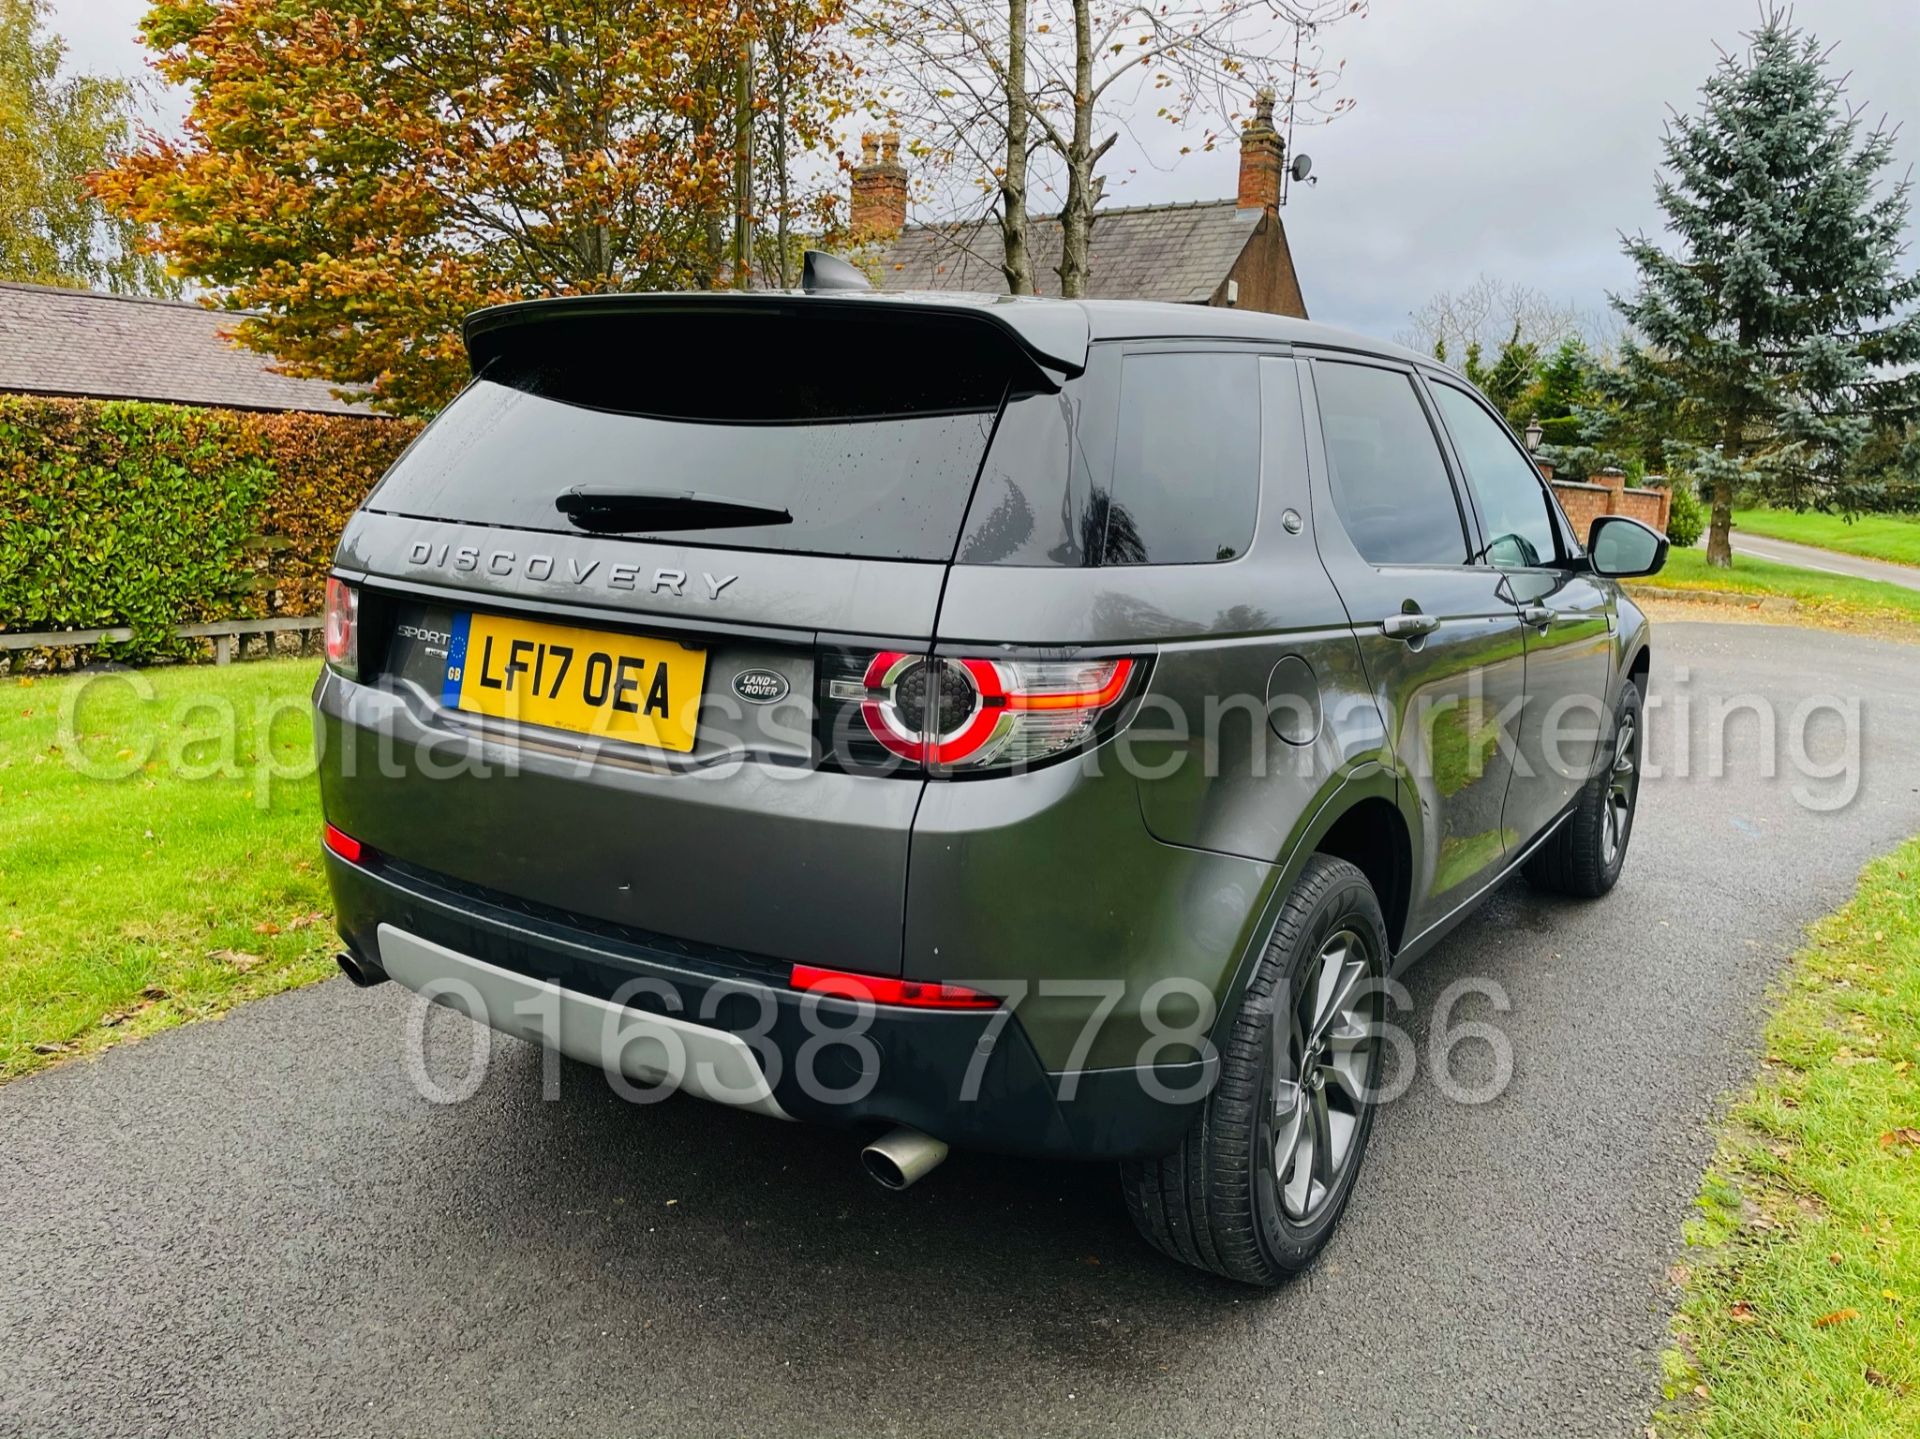 (ON SALE) LAND ROVER DISCOVERY *HSE EDITION* 7 SEATER (2017) '2.0 TD4 - AUTO - LEATHER - SAT NAV' - Image 12 of 64